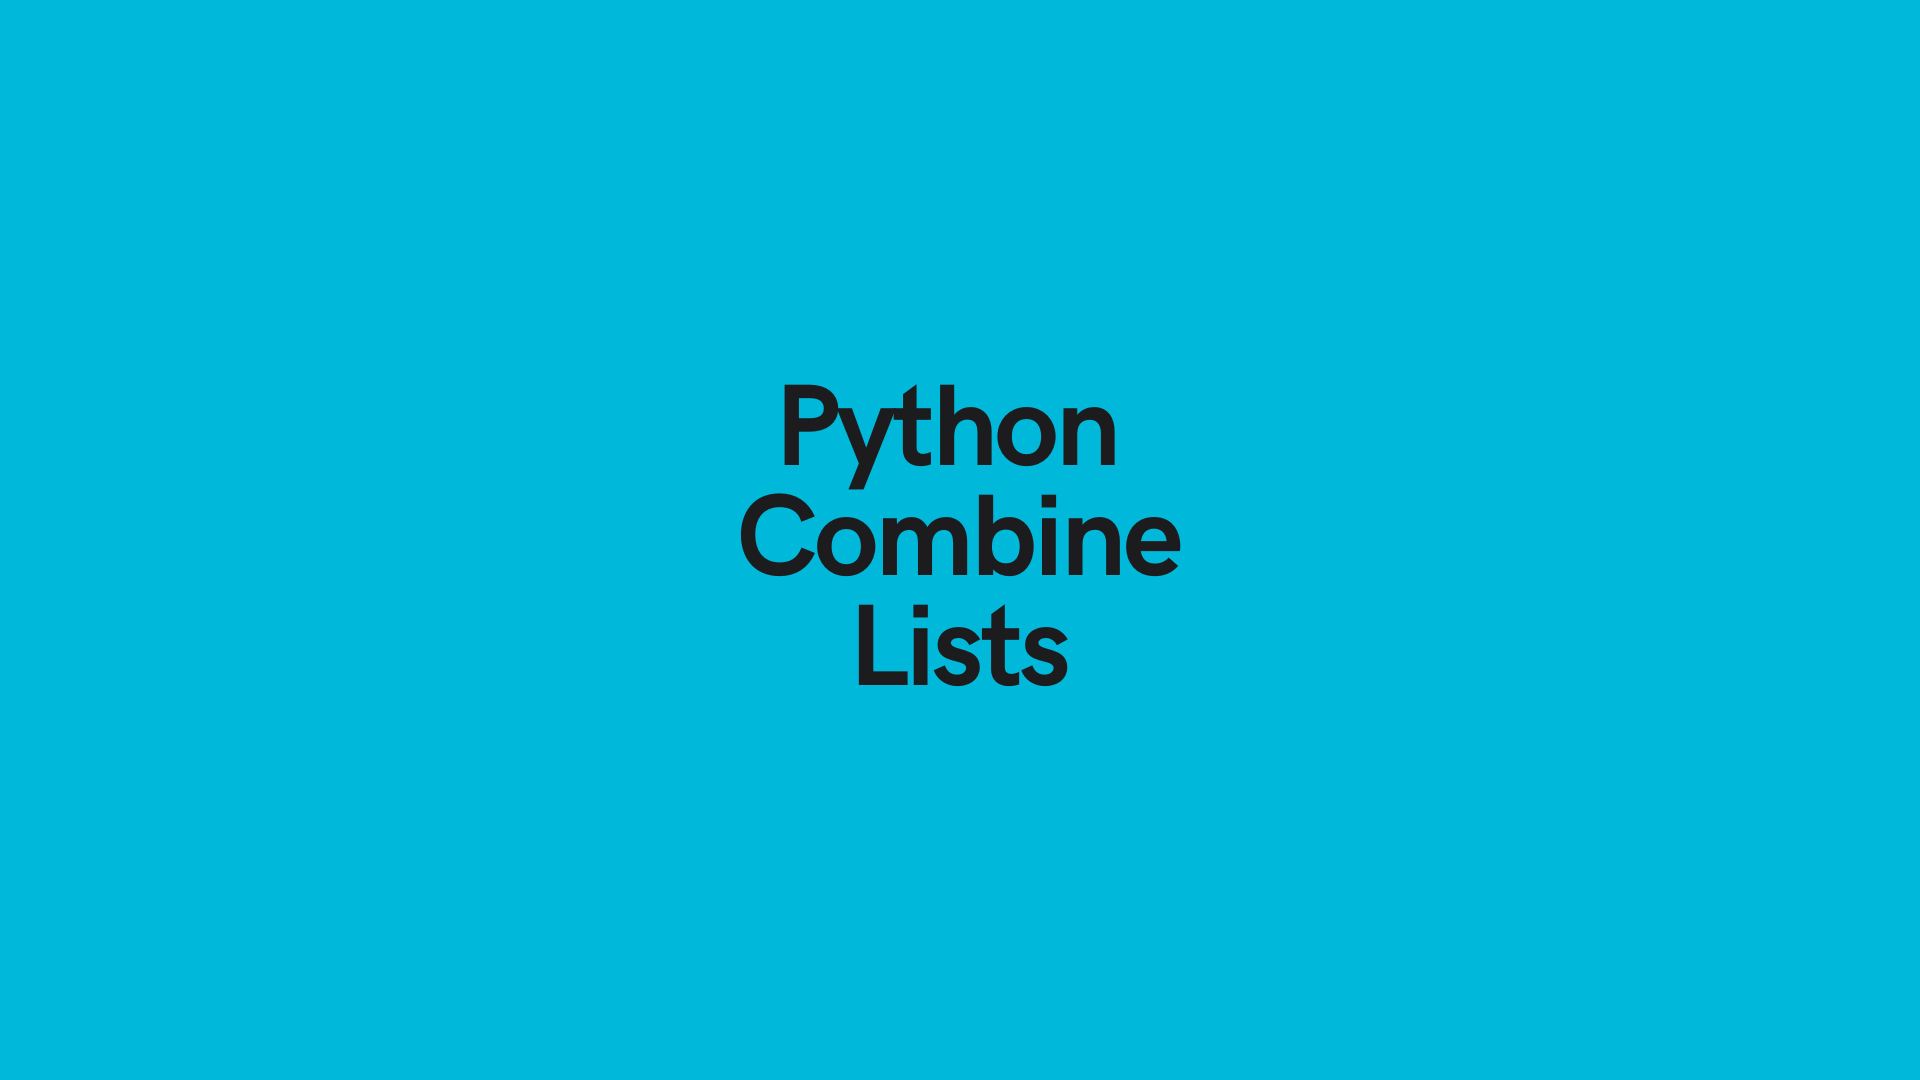 Merge lists list. Combinations Python. Join Python. List in Python. Merge Python.